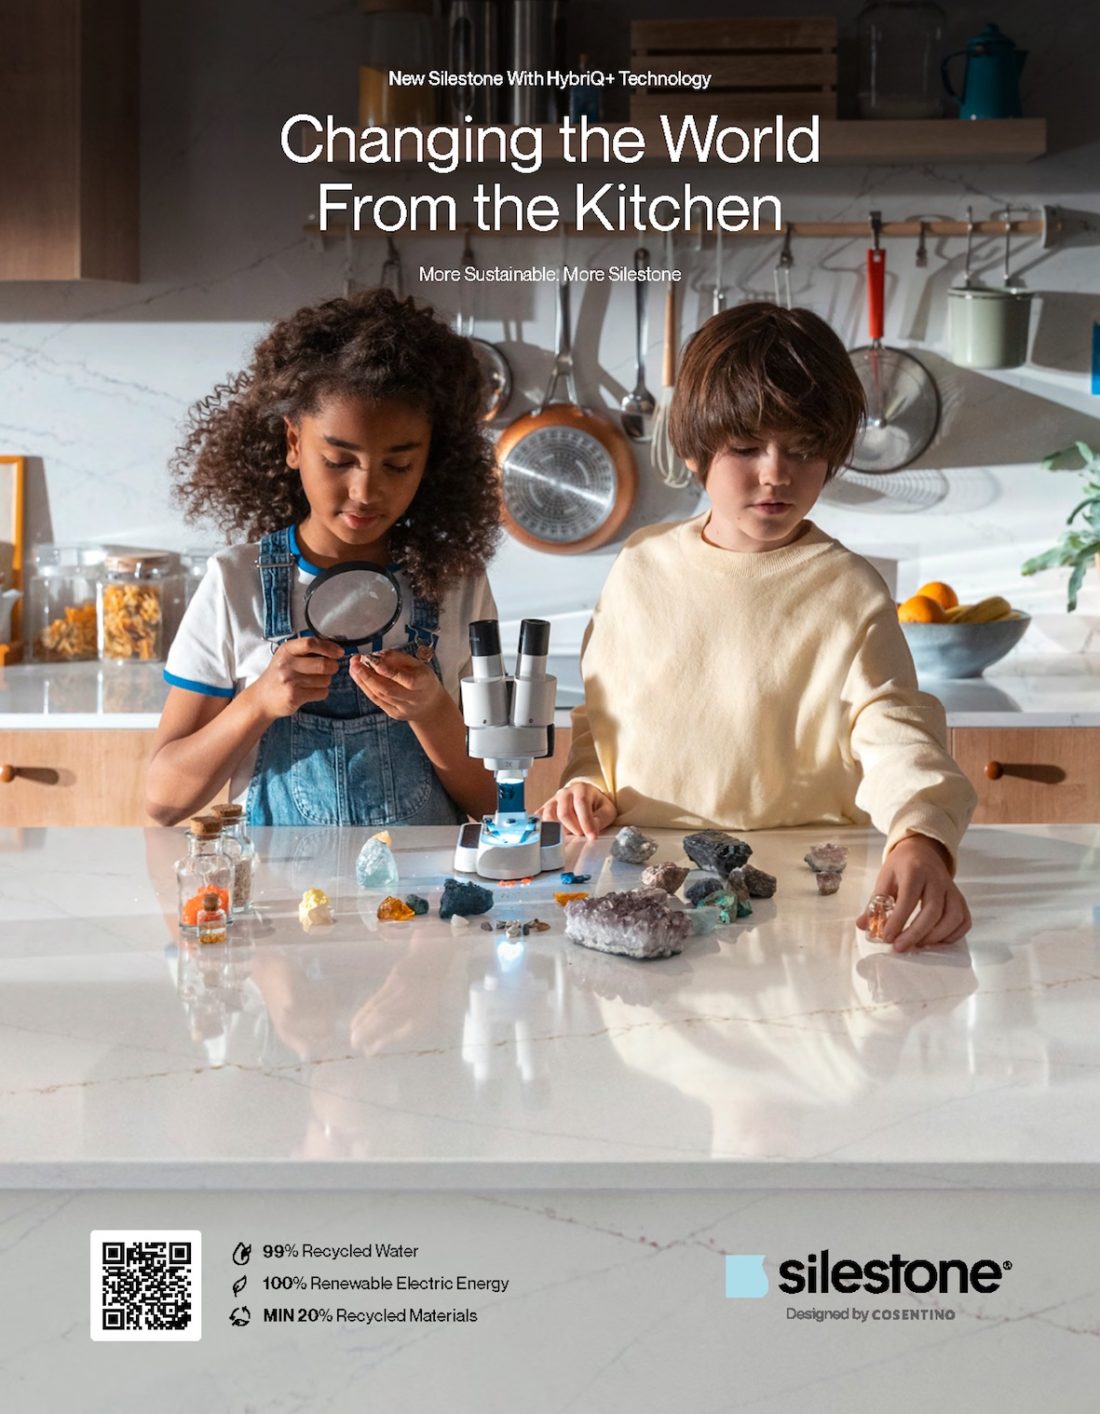 Image 17 of Silestone Campaign HybriQ 2022 2 in New Silestone campaign: innovation and sustainability to change the world - Cosentino